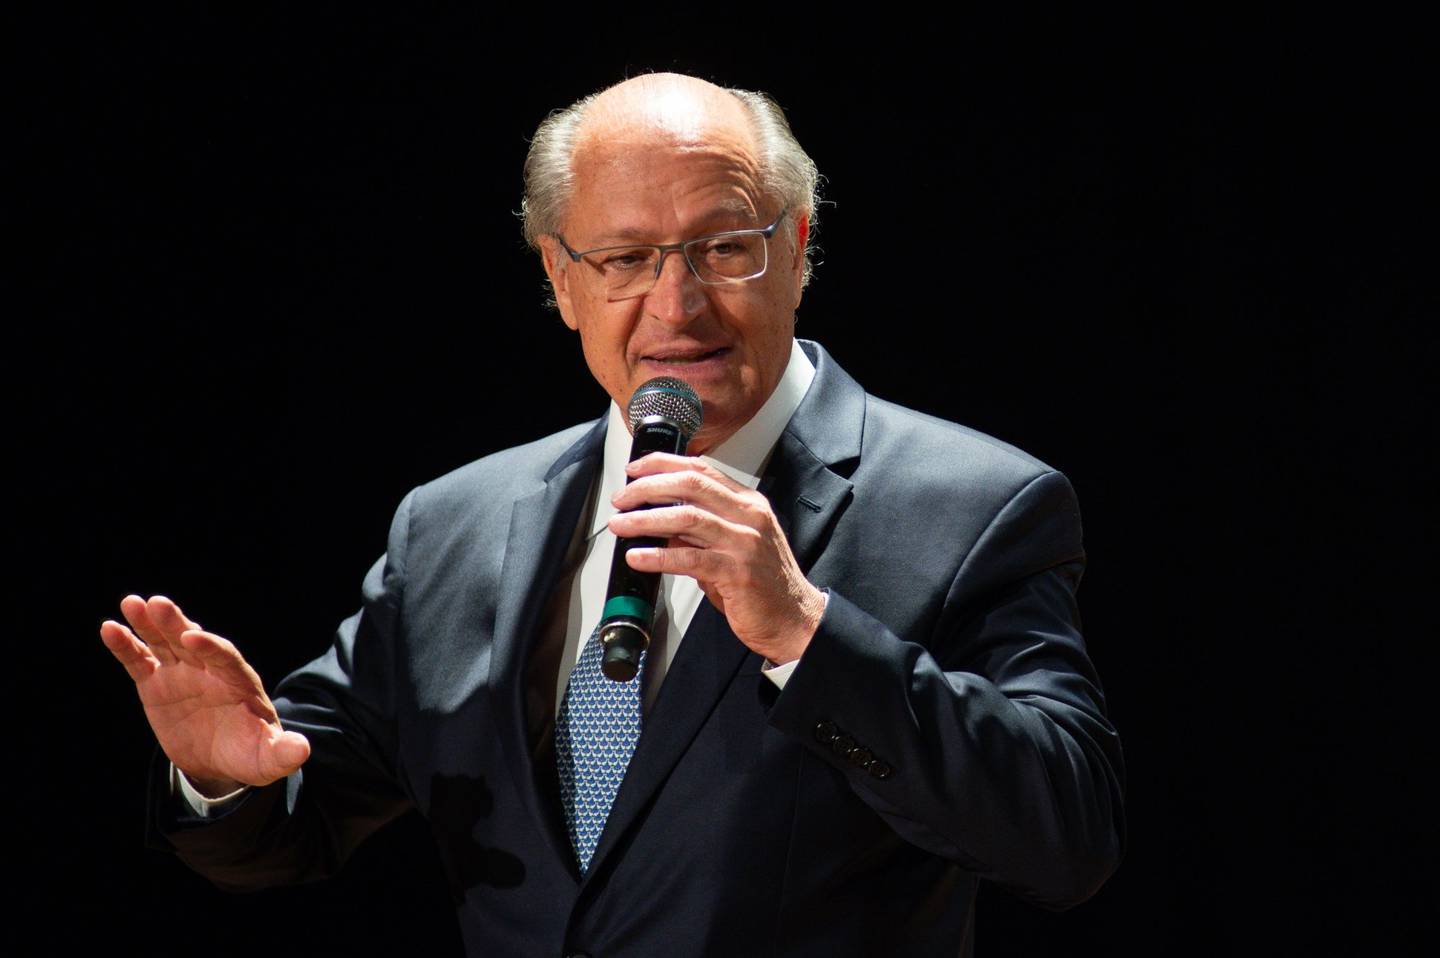 Alckmin, Brazil's vice president-elect, will take on the Trade and Industry portfolio in Lula's government